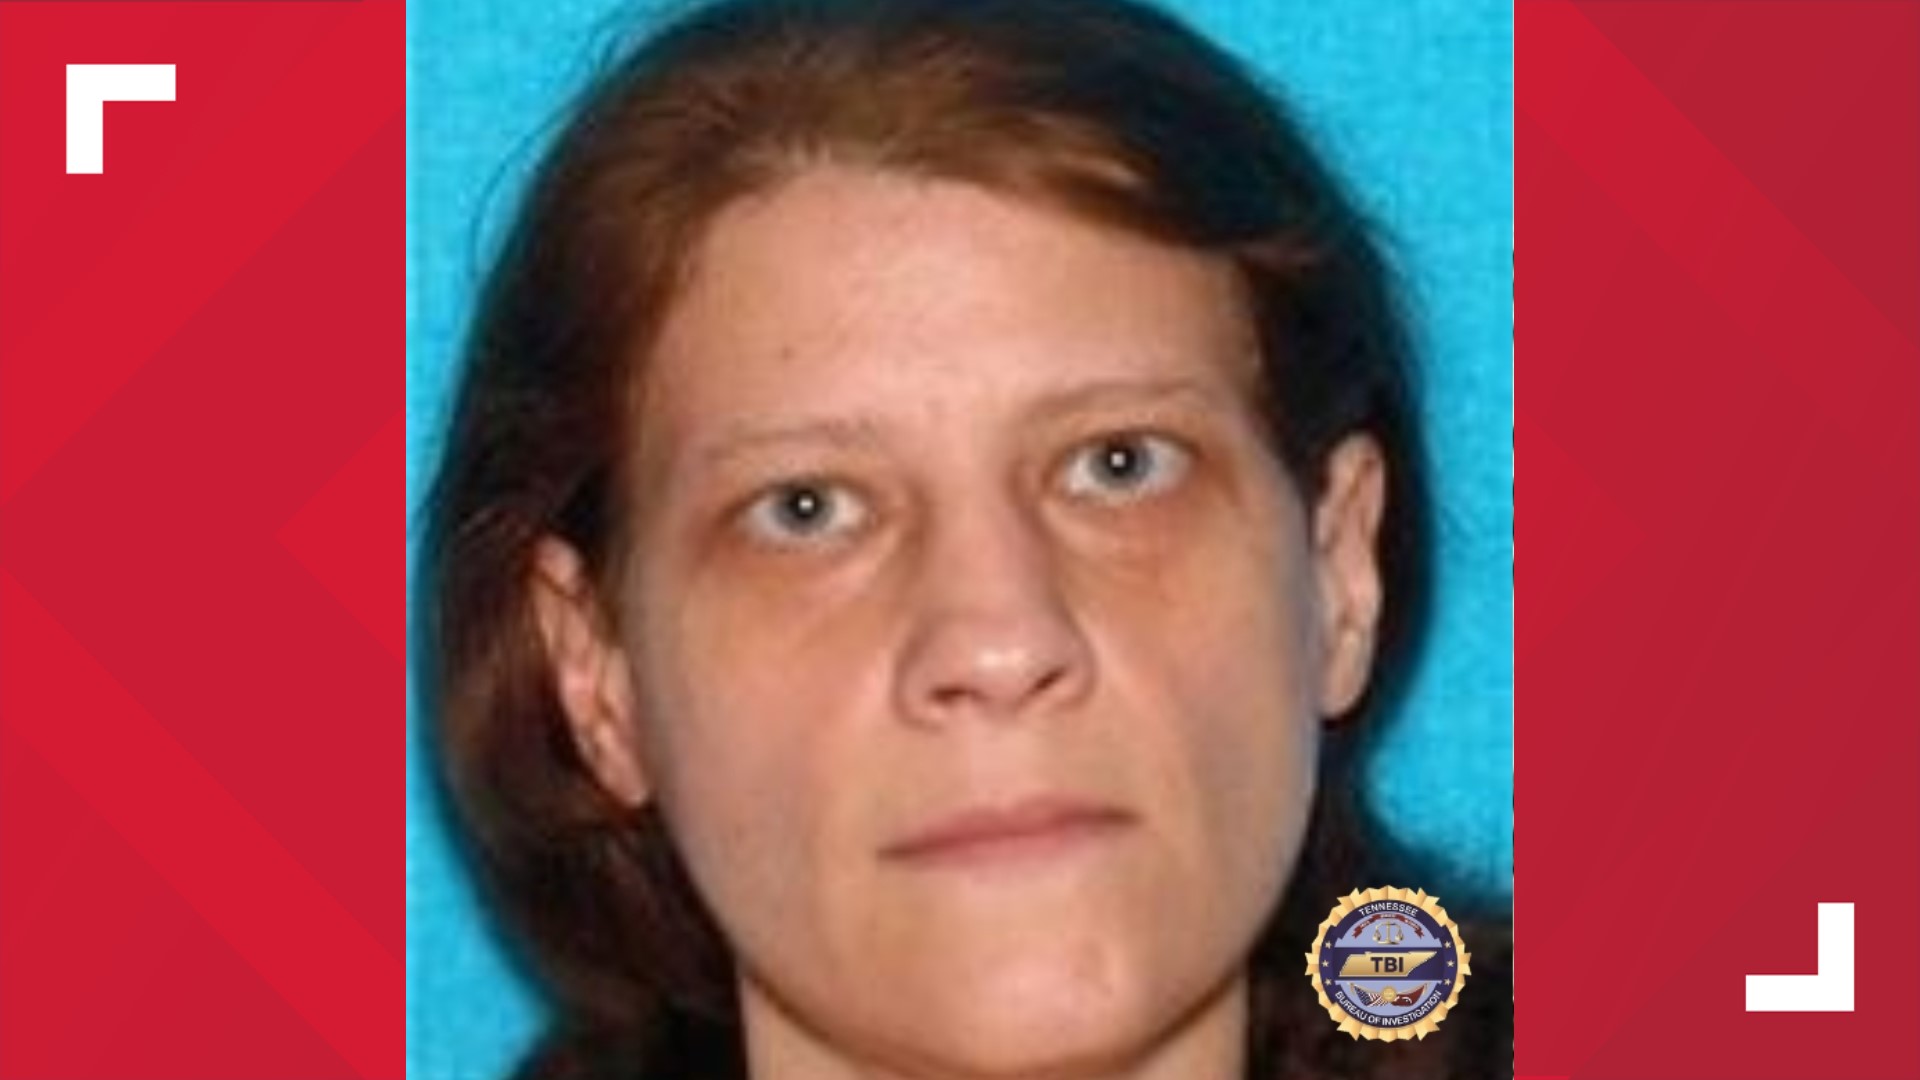 Christine Haun, 36, was last seen in the area of Bug Hole Road in Cumberland Gap in January.